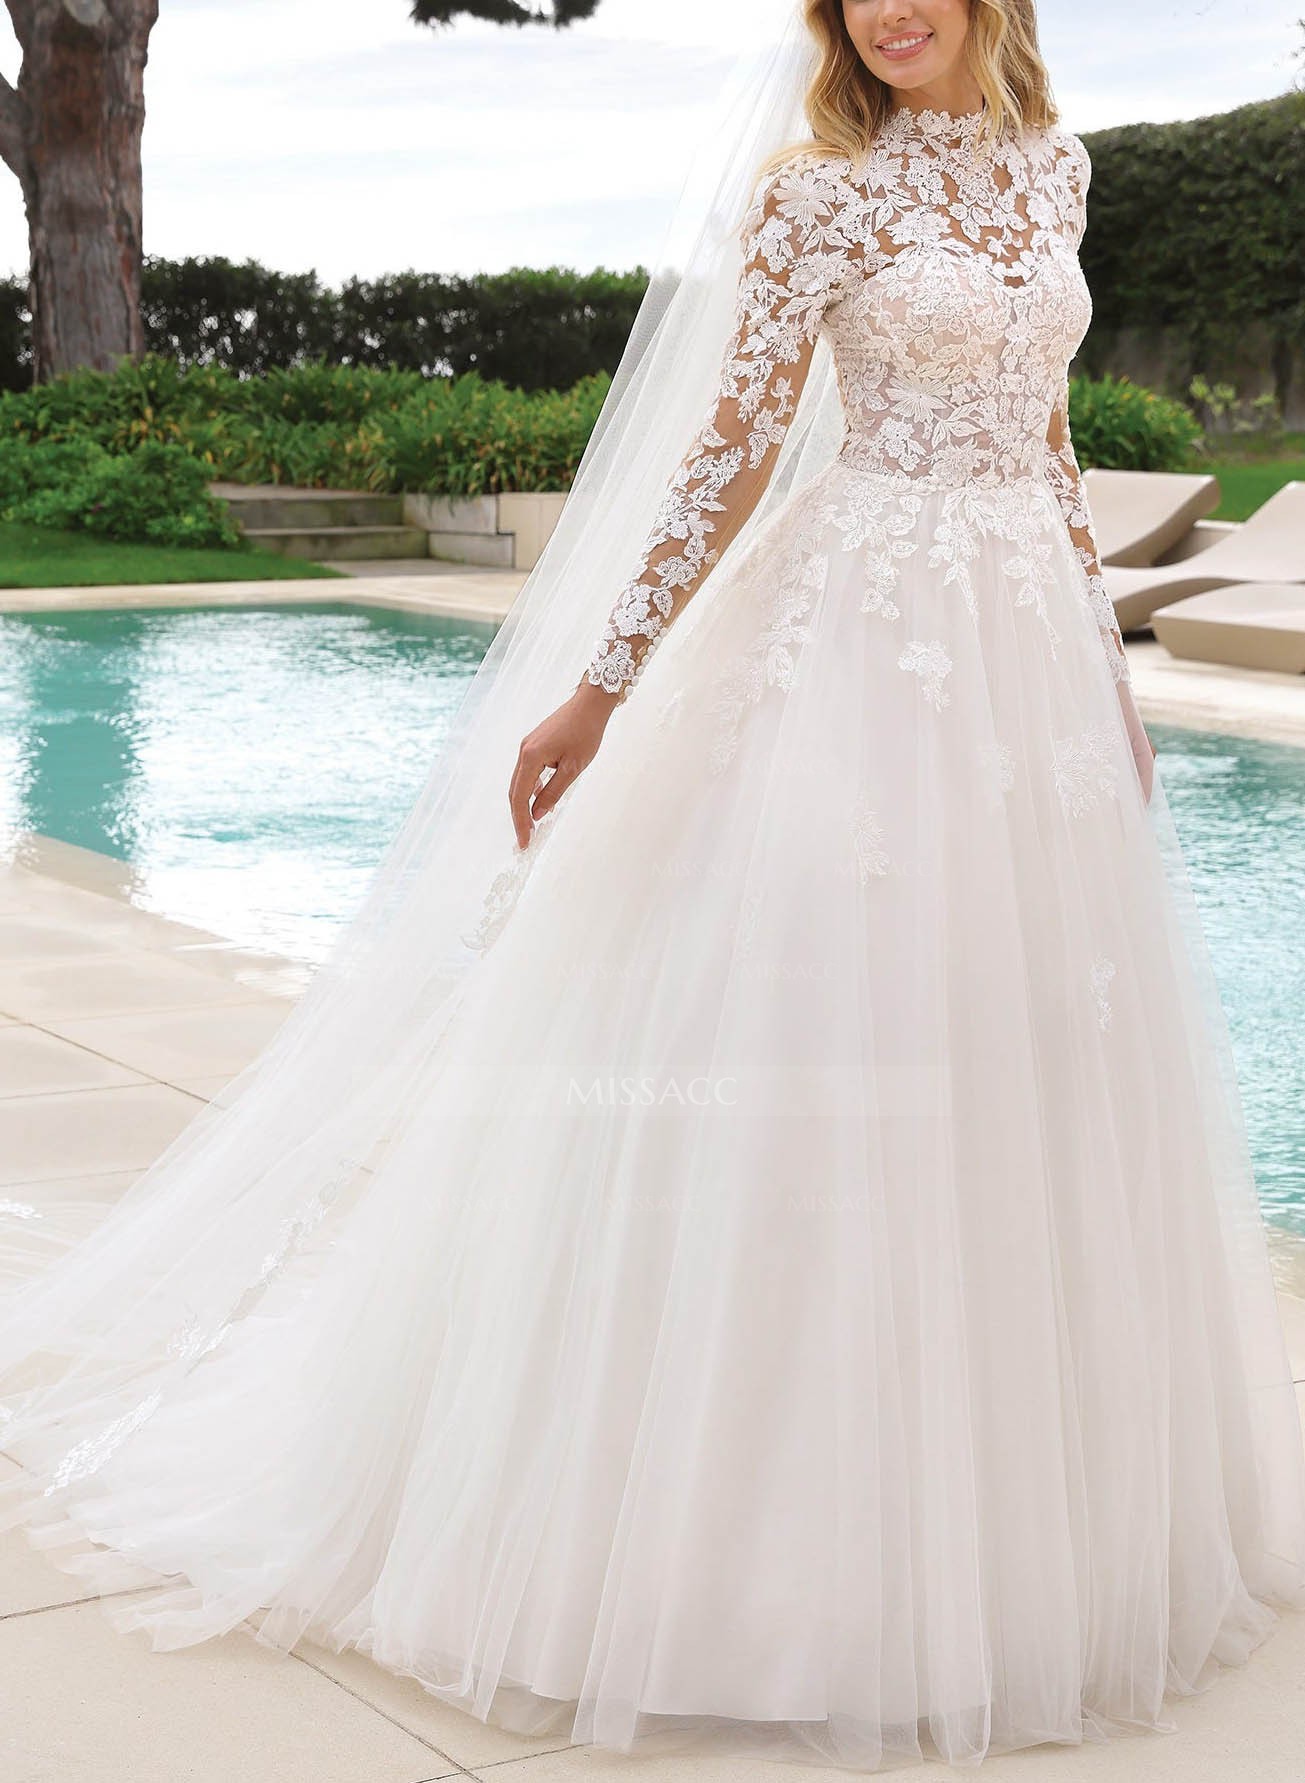 High Neck Lace Long Sleeves Ball-Gown Wedding Dresses